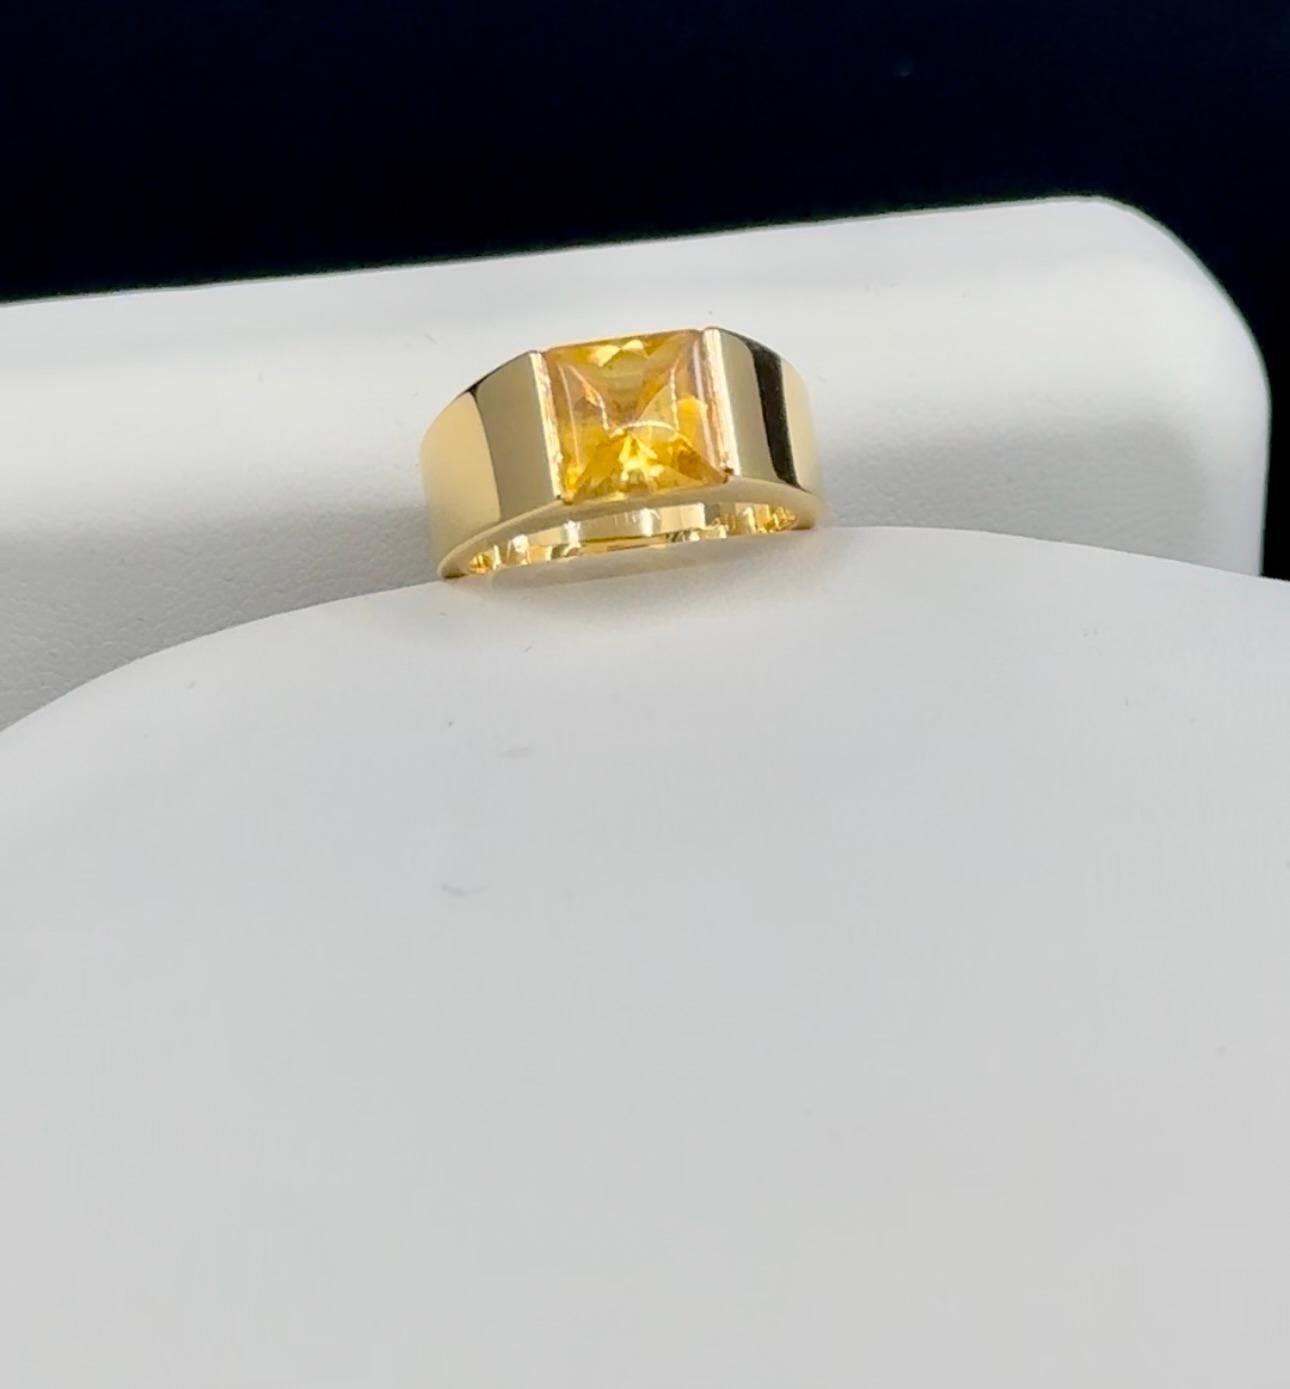 Vintage Cartier Vivid Citrine Tank Band Ring 
Size: 51
1997 Cartier French Hallmarks 750 
The iconic tank ring.
Square Cabochon Citrine Set Open Tension Setting.
Handsome Made in France
18 k Yellow  Gold 
Geometric Band Ring
Dimensions of the